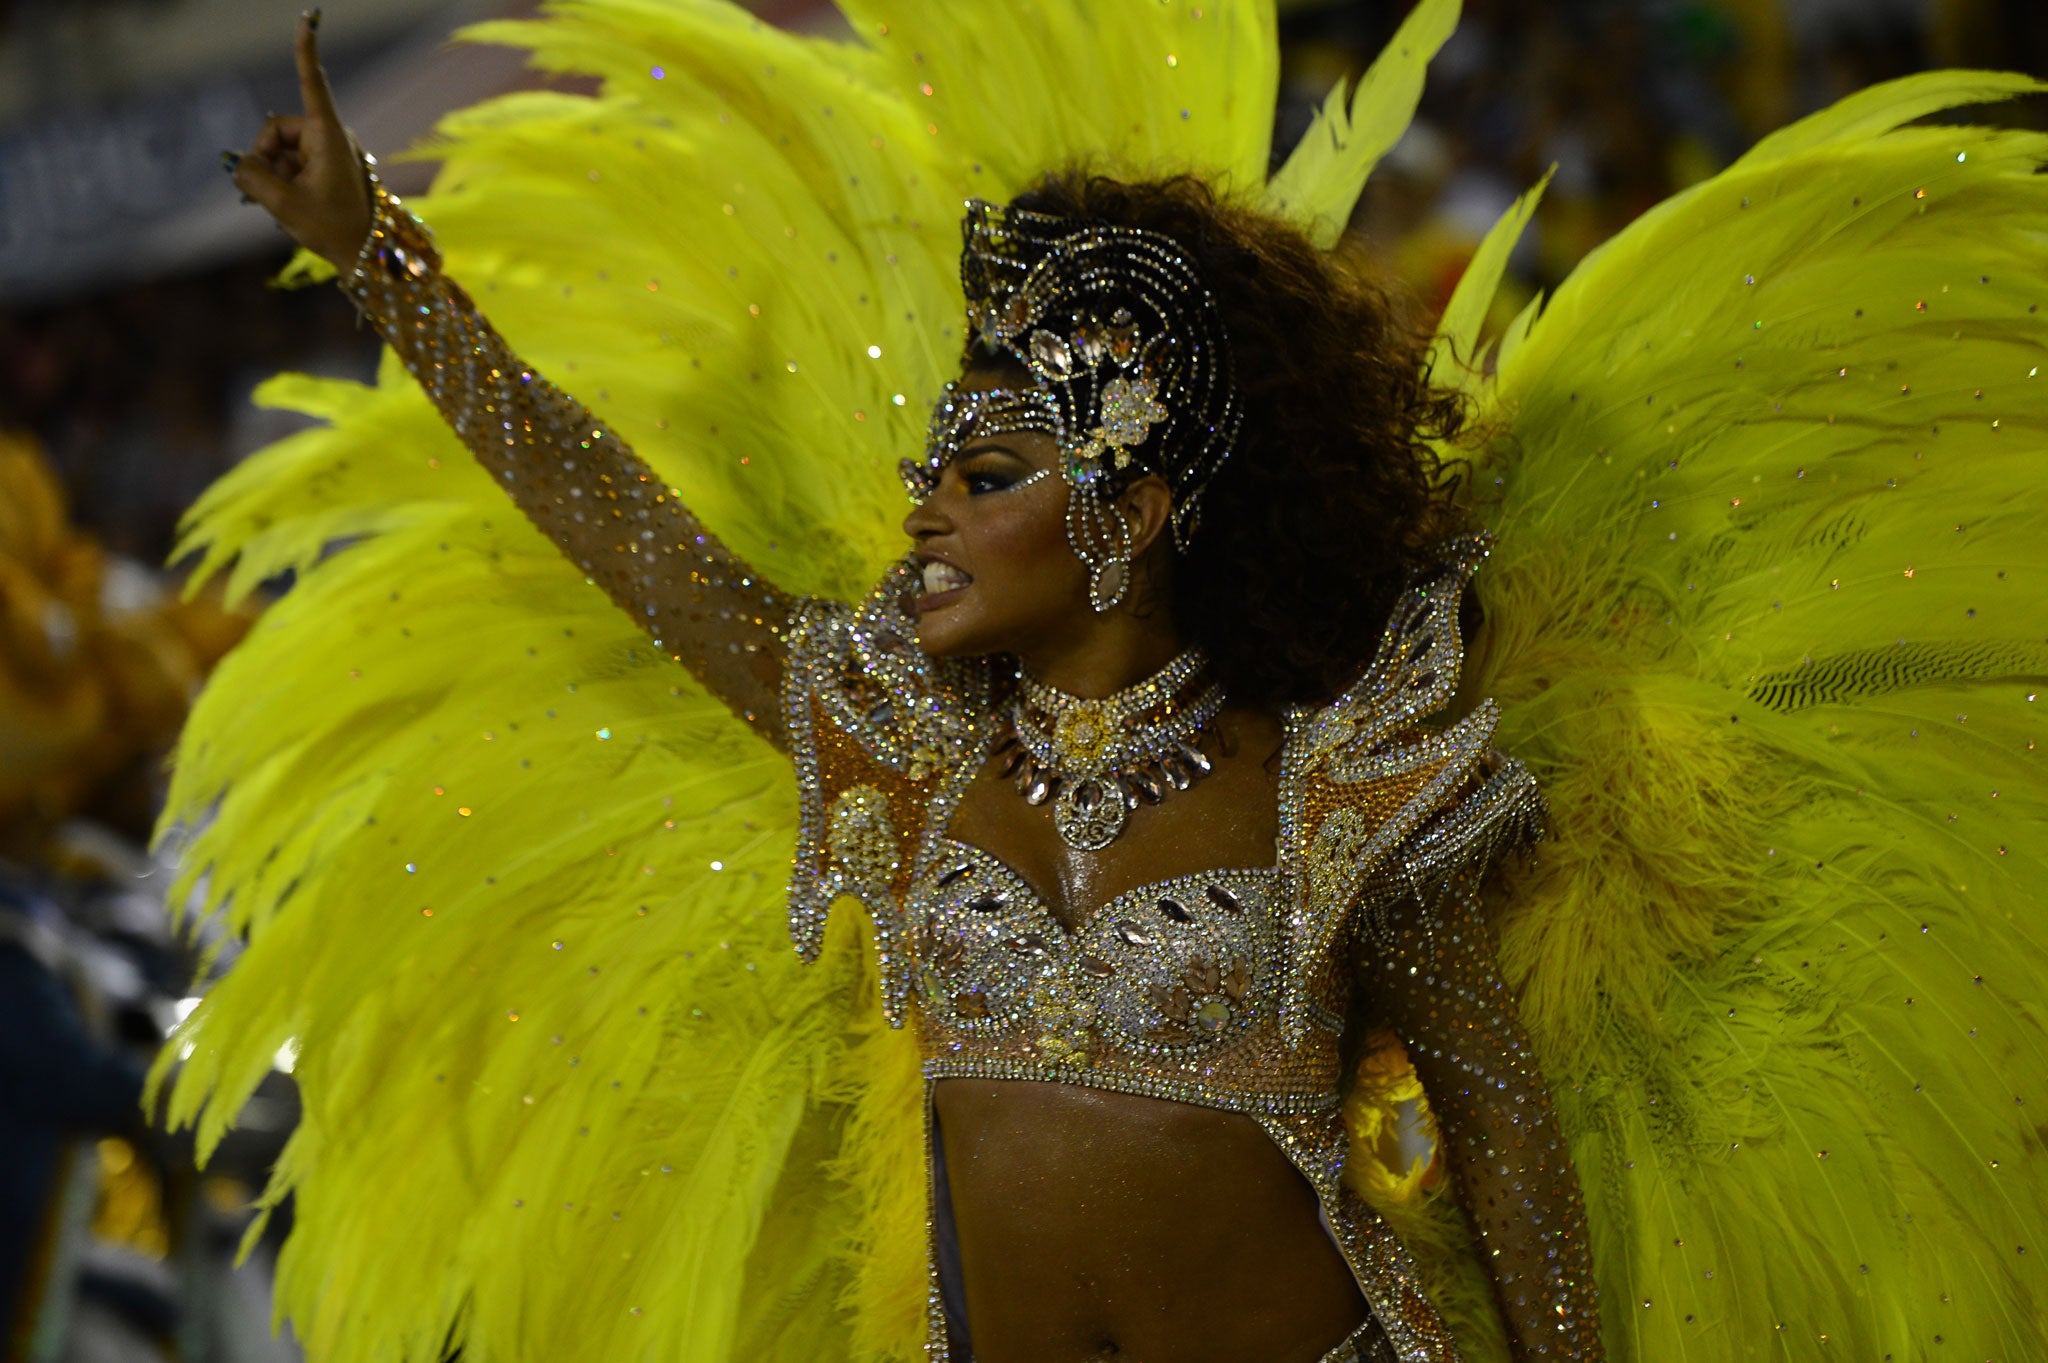 The Changing Sounds of Salvador Carnival